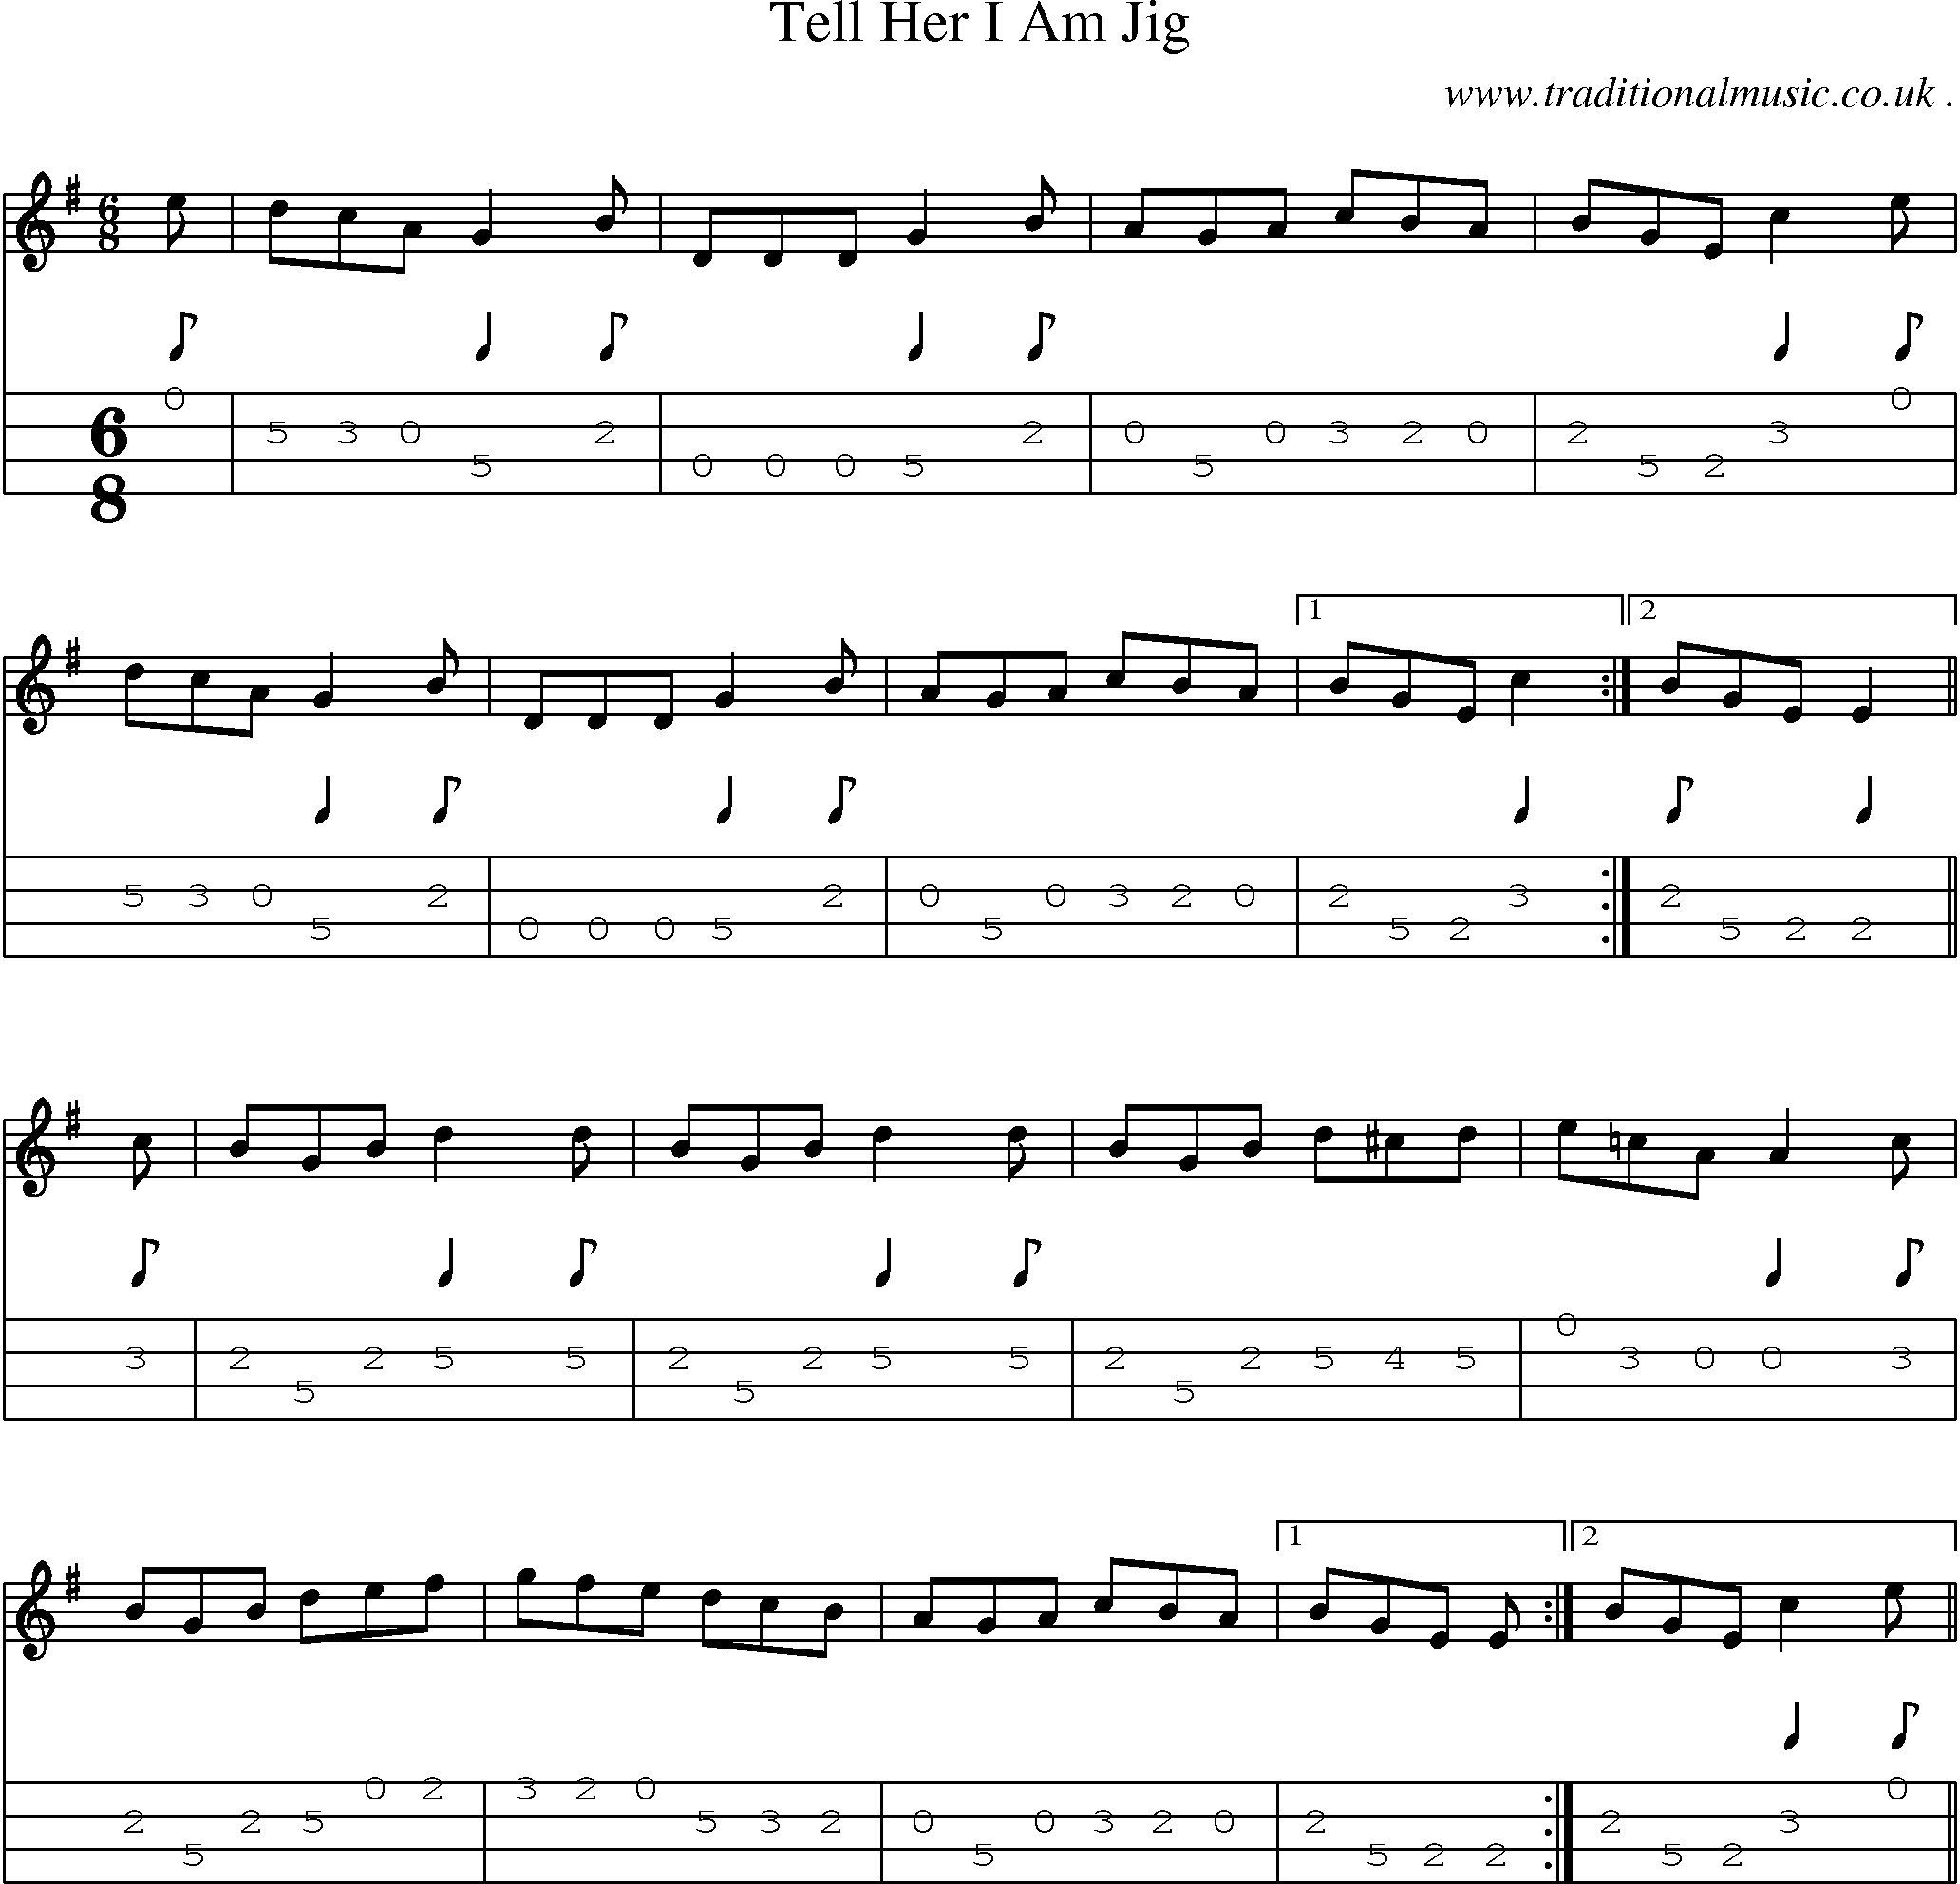 Sheet-Music and Mandolin Tabs for Tell Her I Am Jig